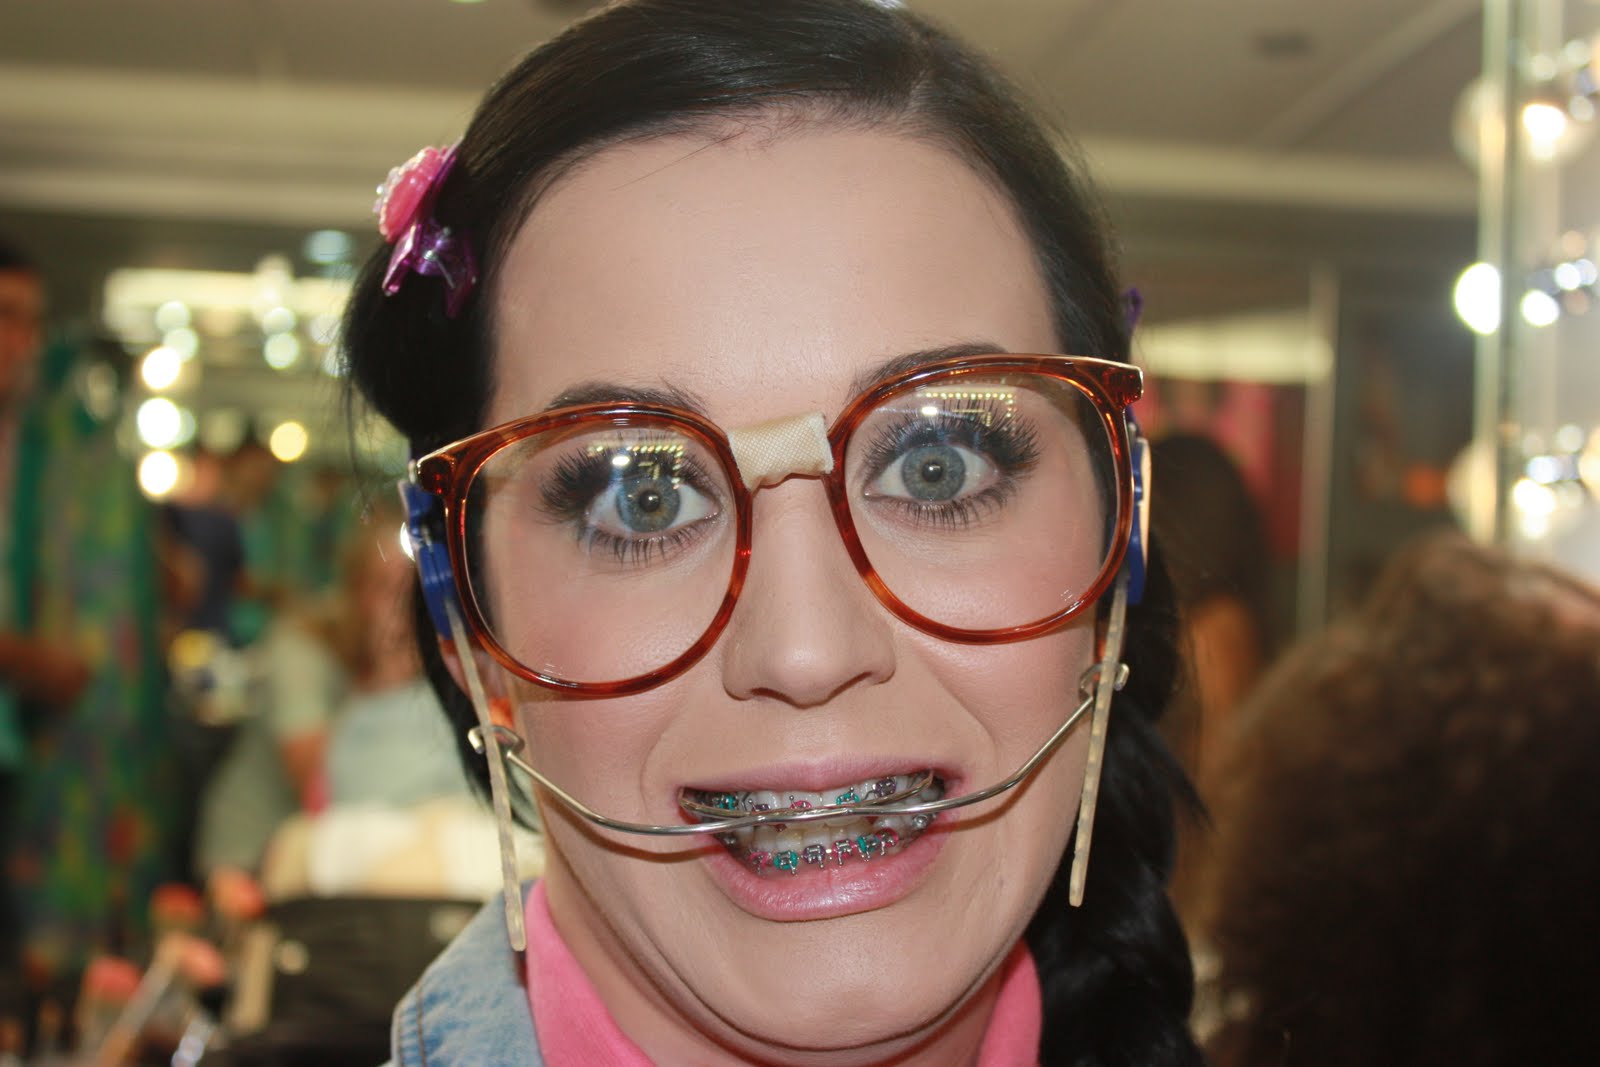 Katy Perry wearing braces and headgear